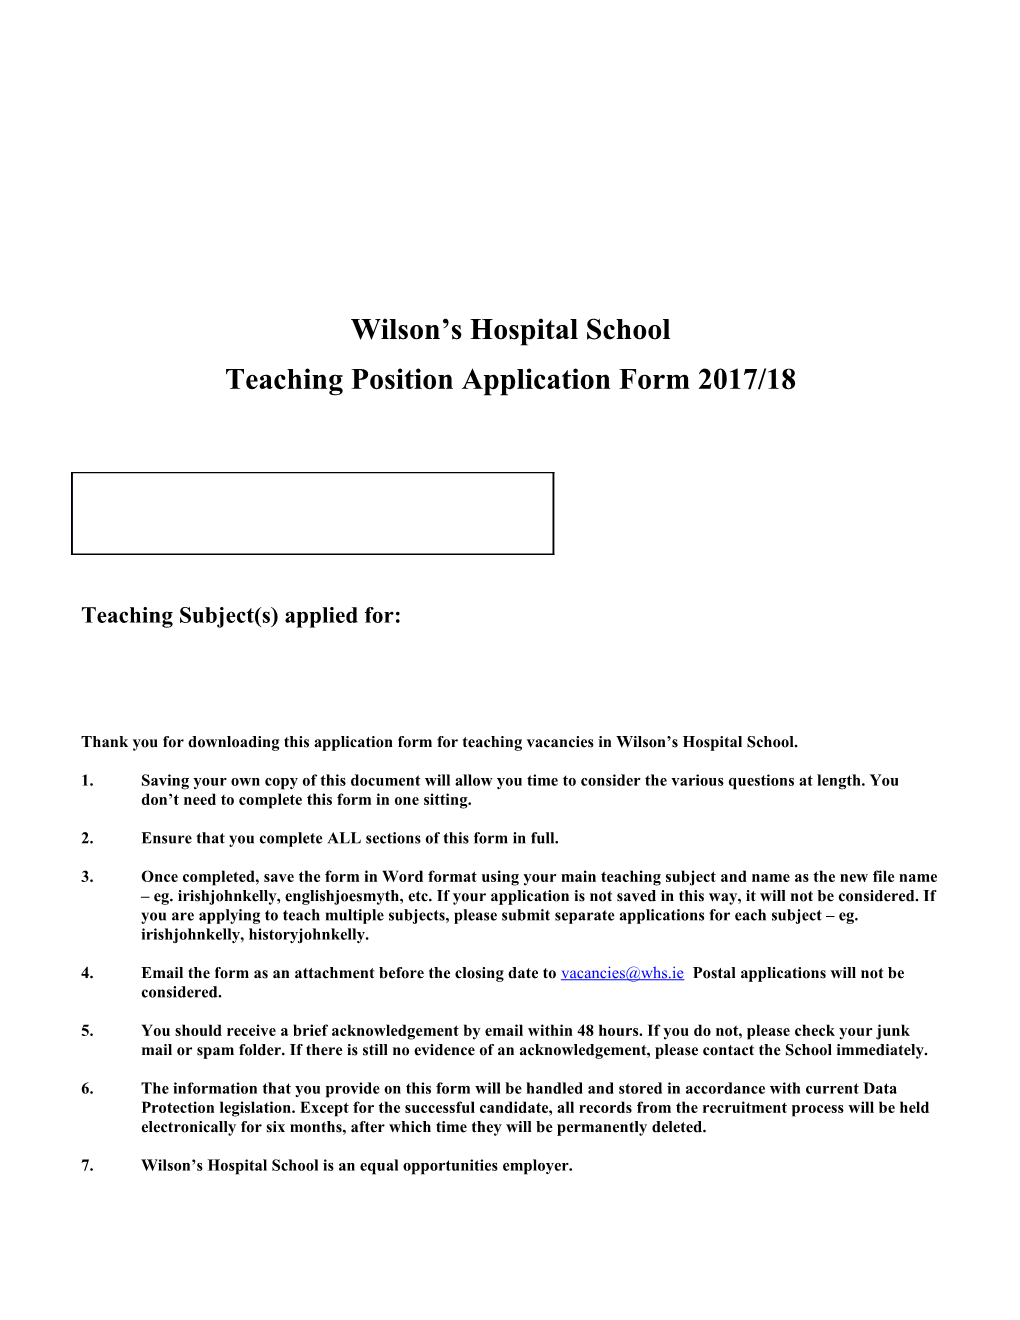 Teaching Position Application Form 2017/18